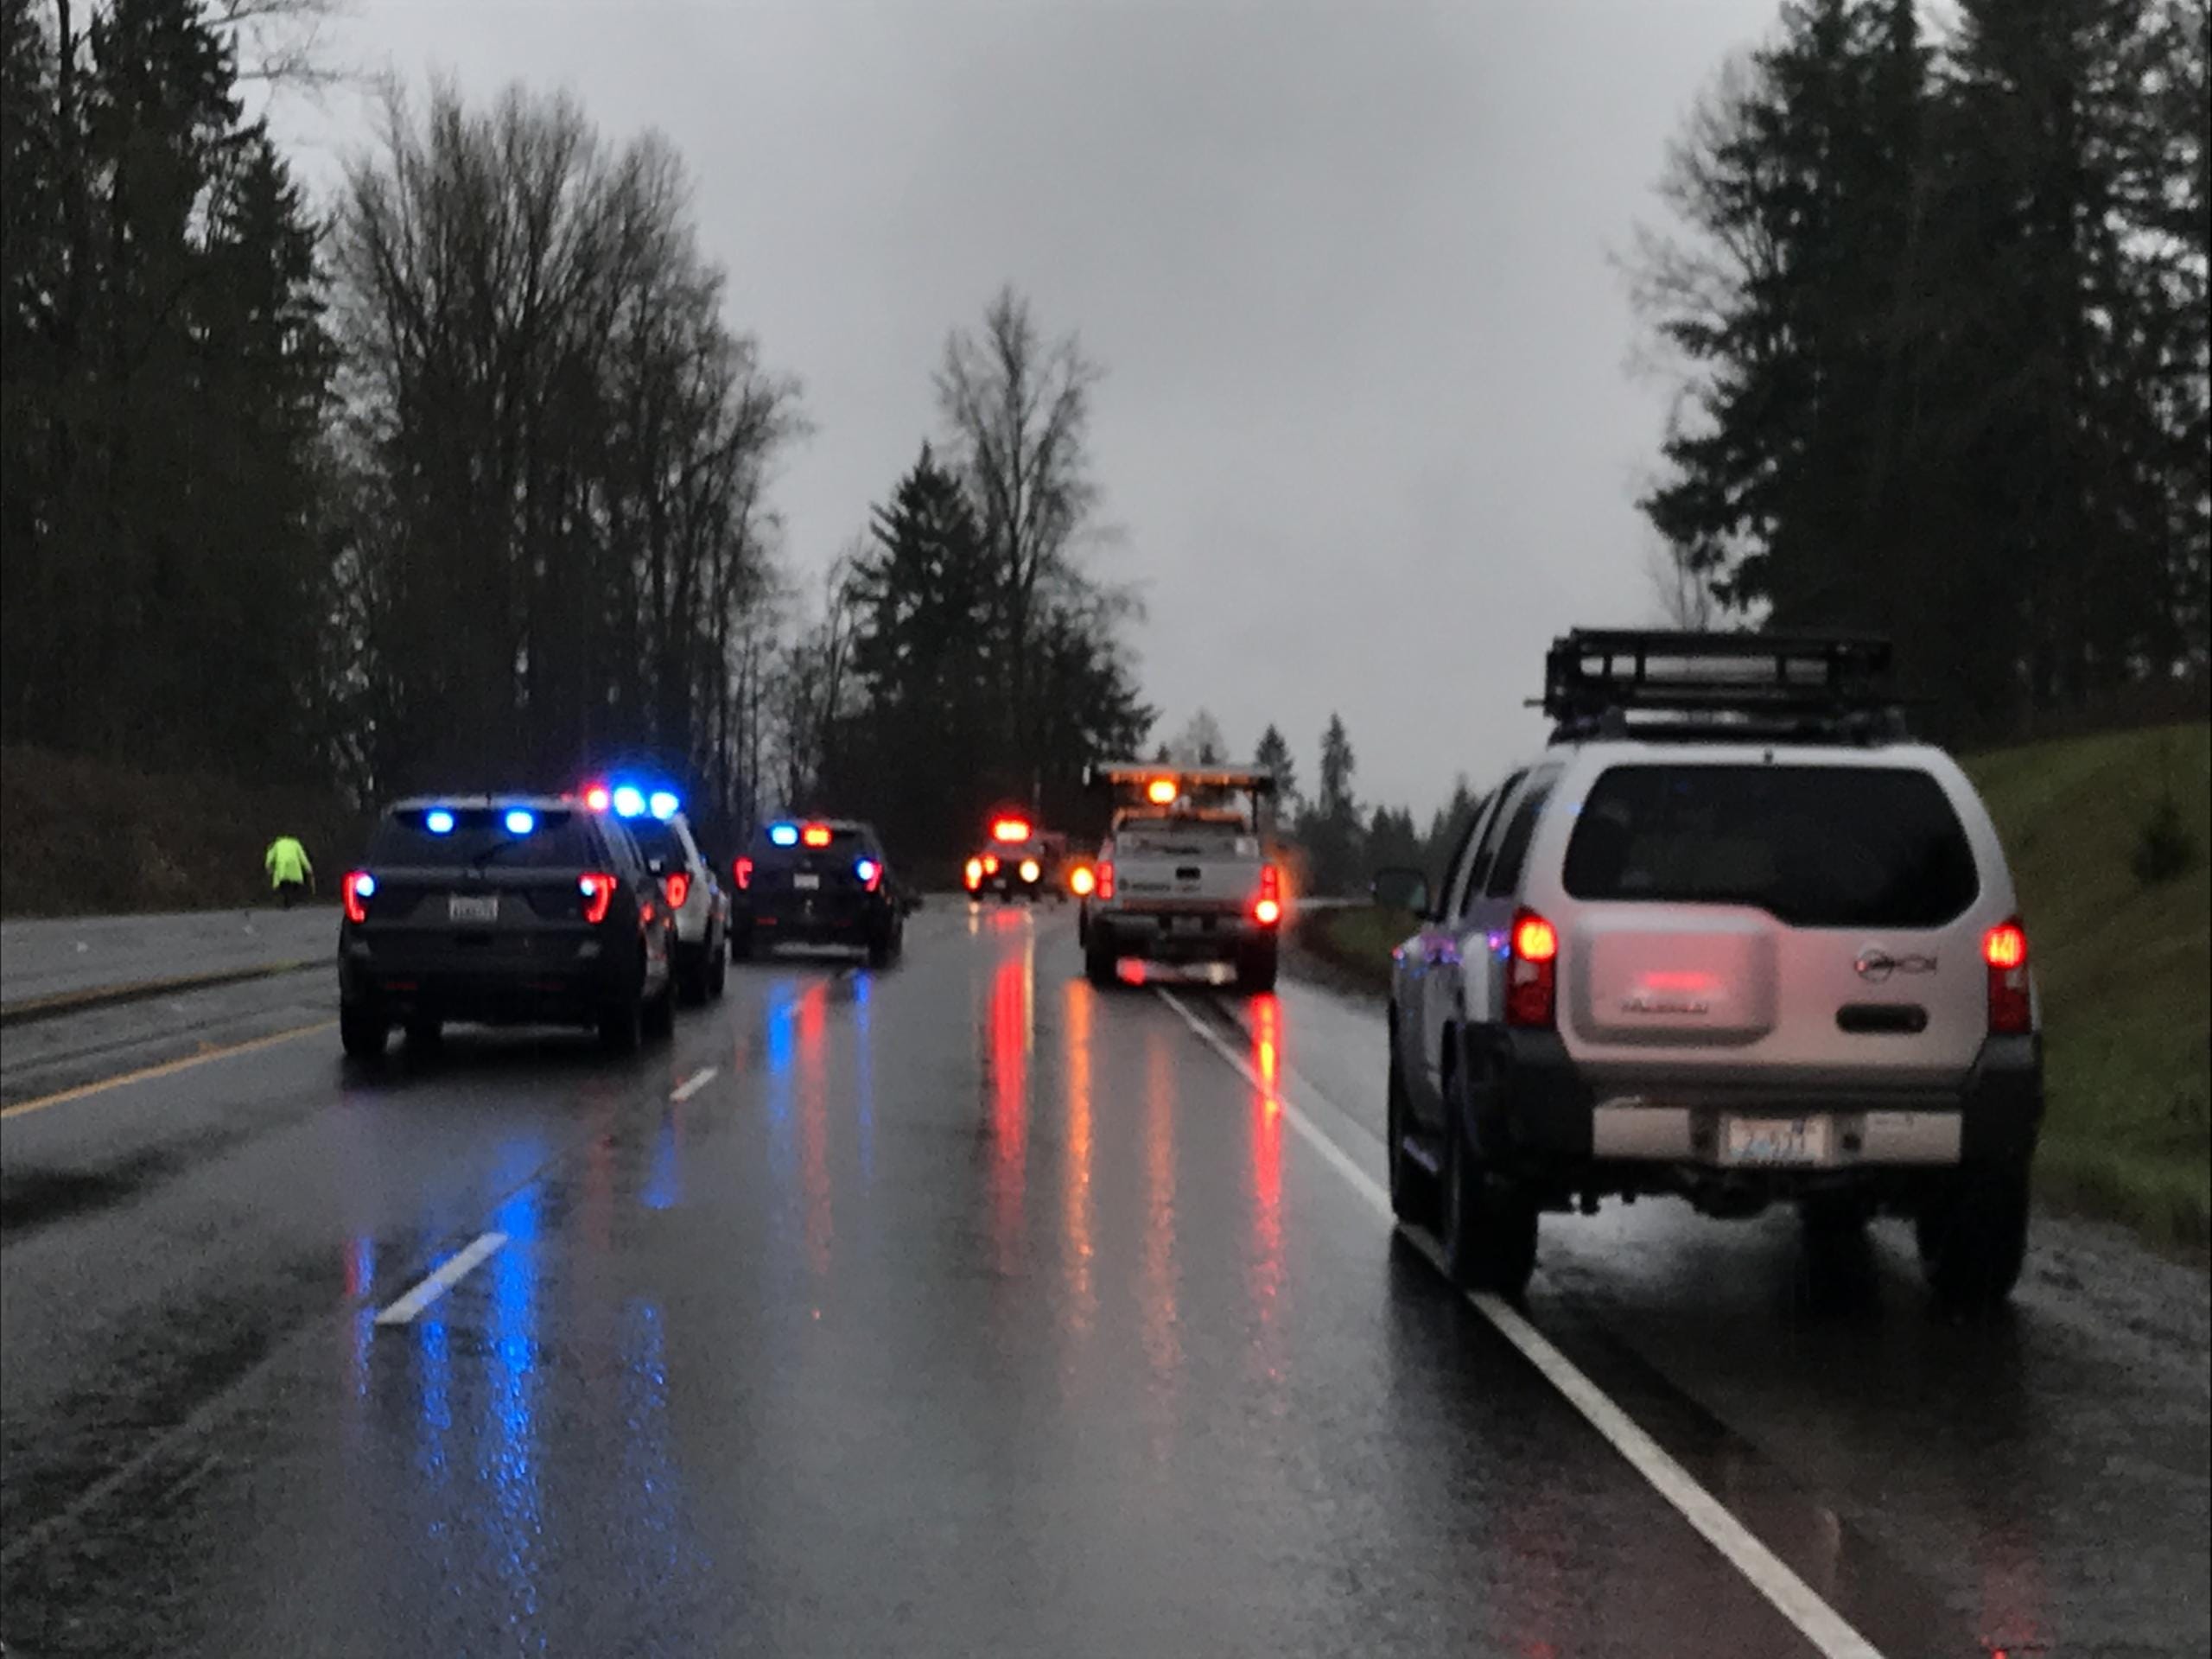 All lanes of state Highway 503 in Brush Prairie have been blocked while law enforcement investigates a crash that a Washington State Patrol spokesman said killed three people and critically injured two children.